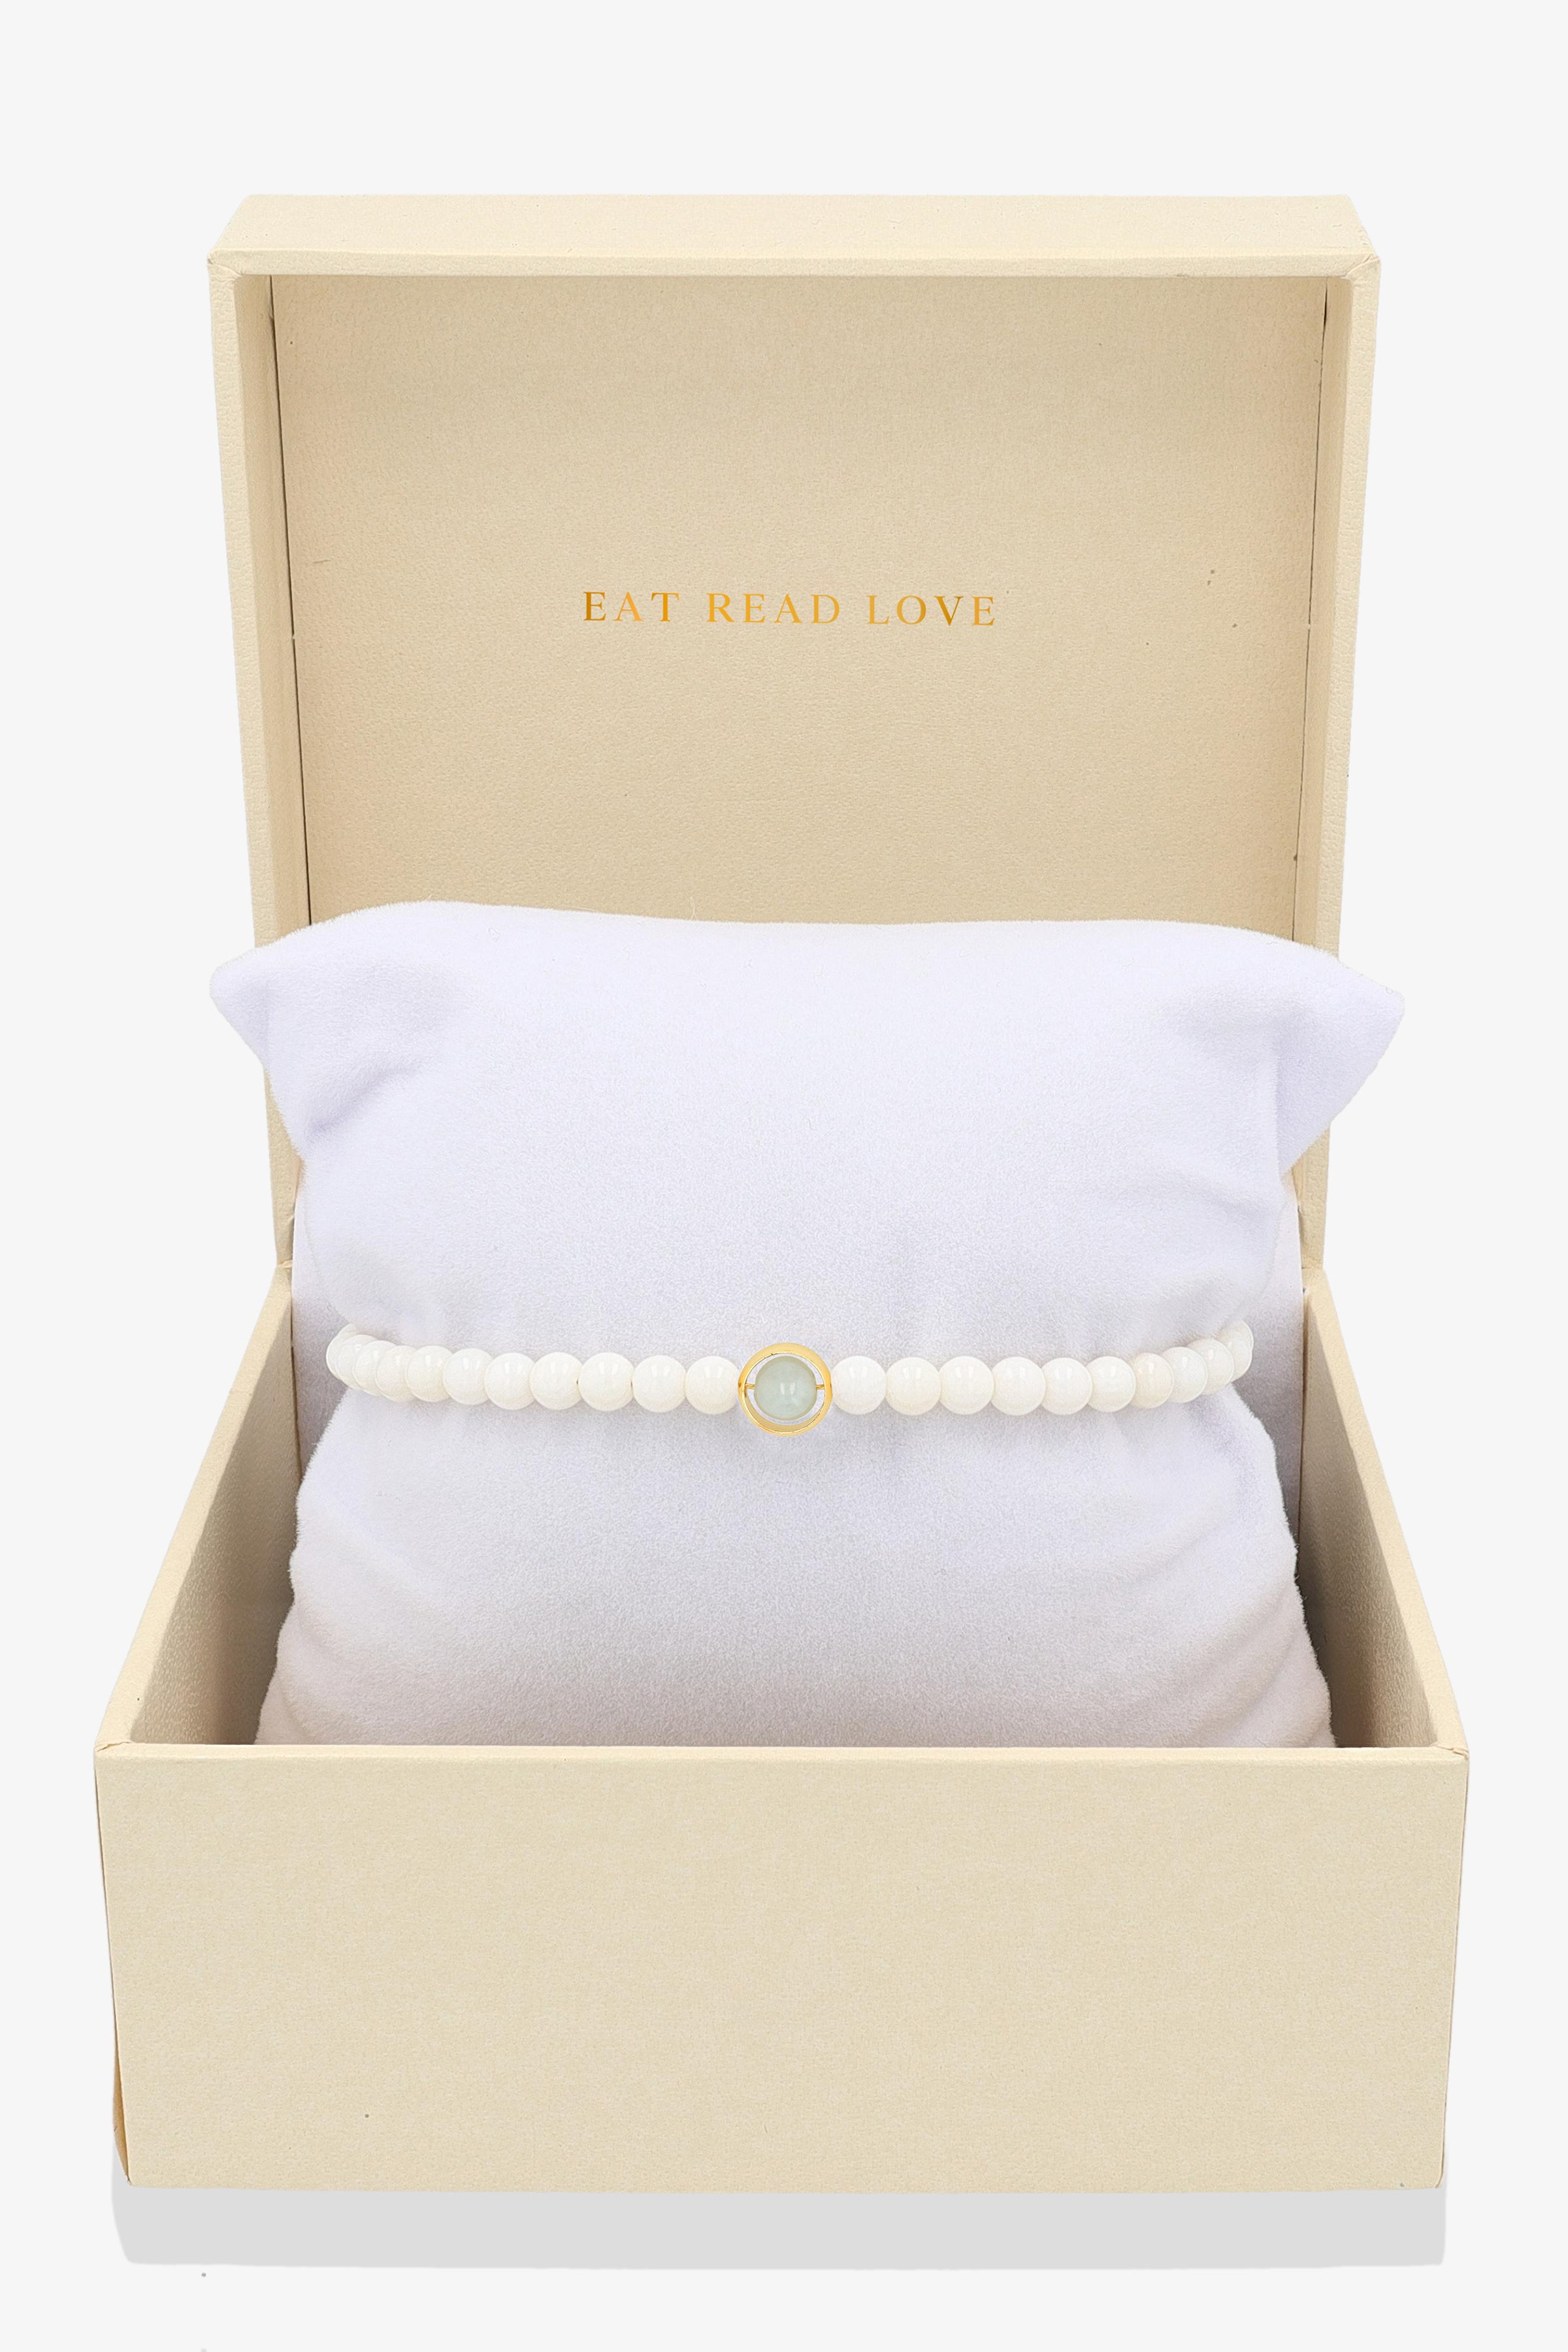 White Coral with Jade Gold Vermeil Honor Bracelet